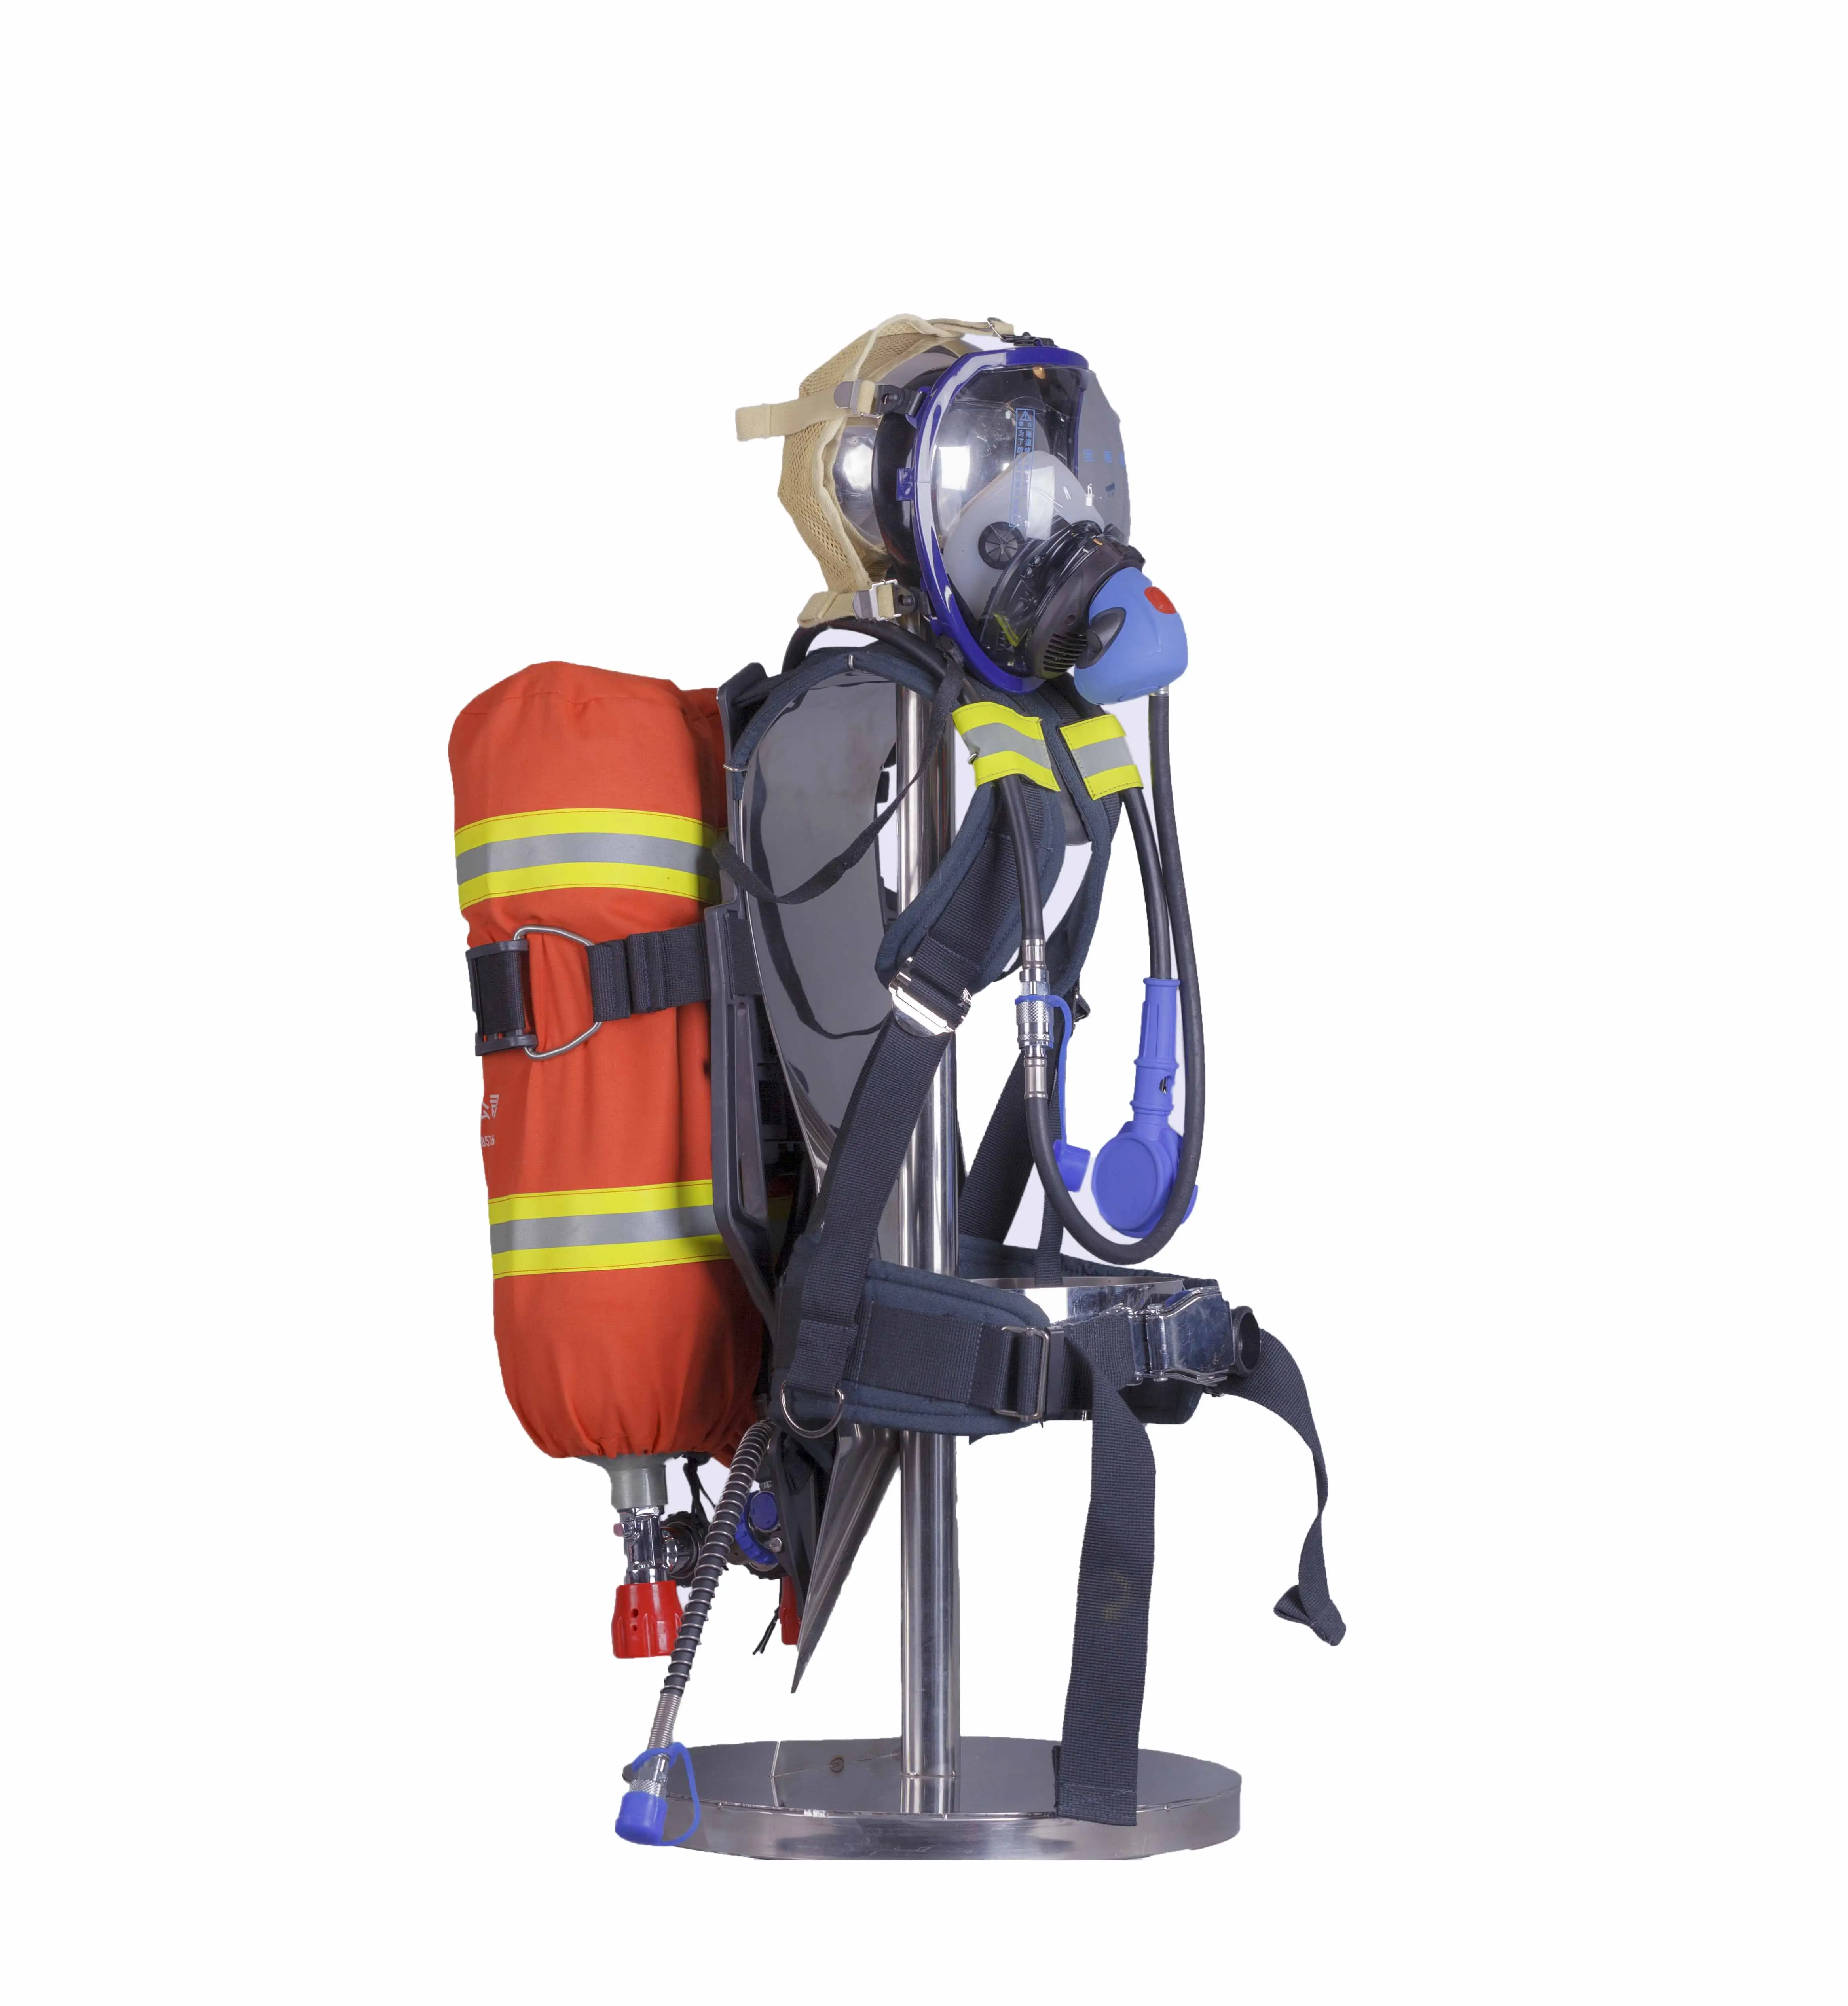 High quality double bottle positive pressure self contained air breathing apparatus